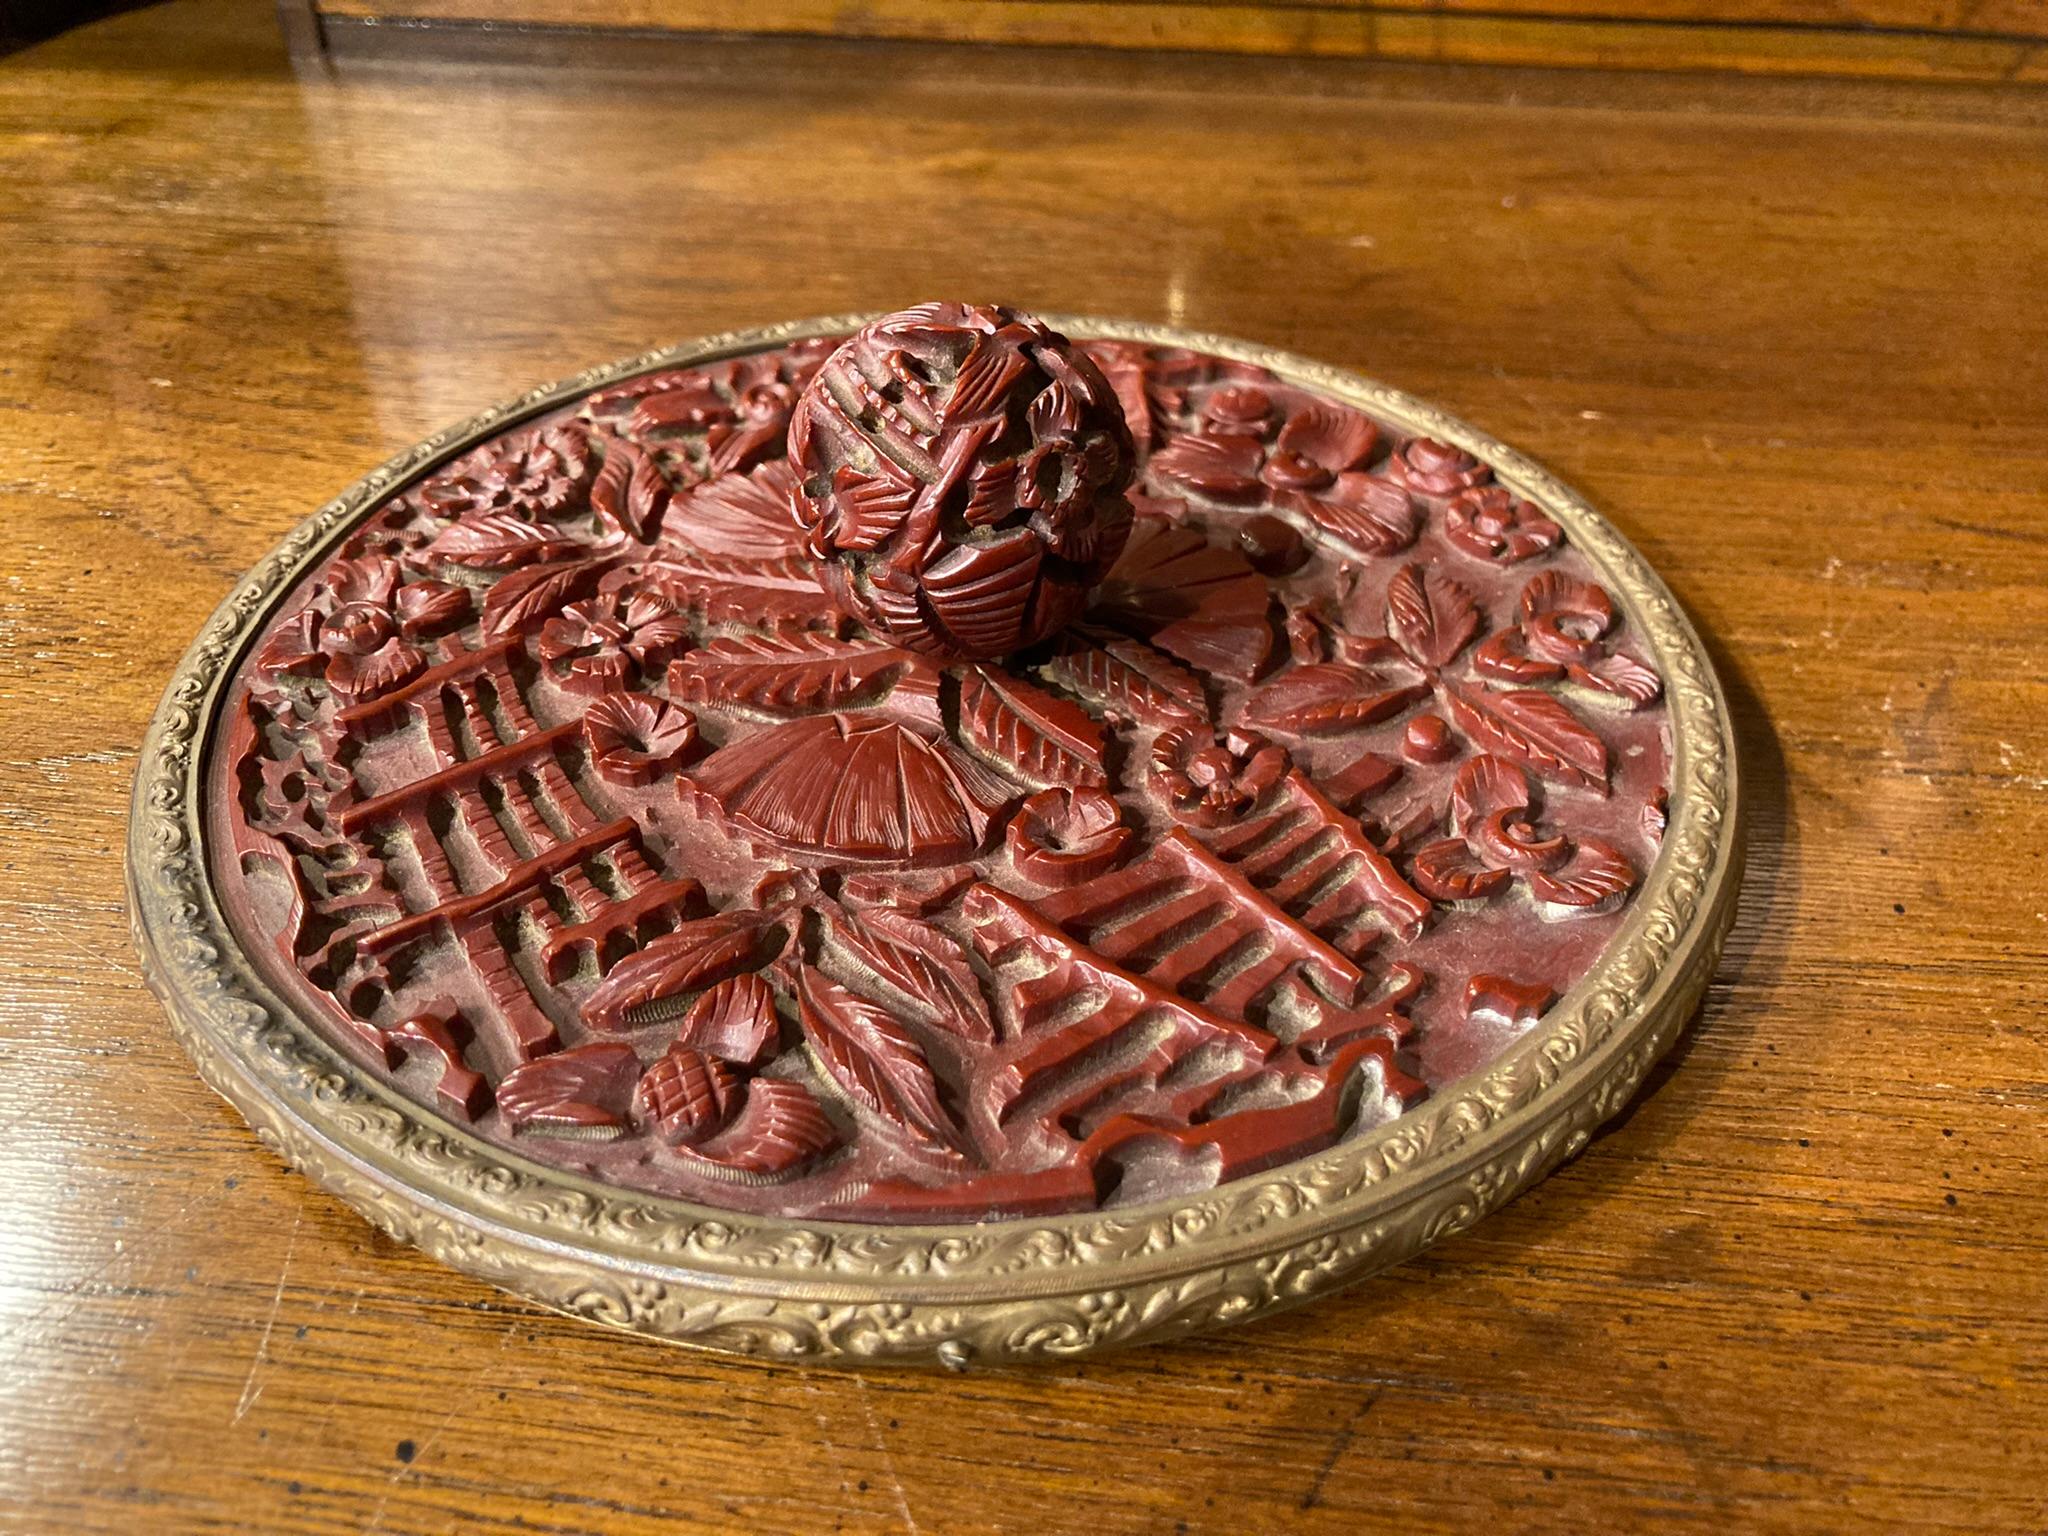 Chinese cinnabar lacquer hand mirror, with floral and rustic garden fences as decoration, all carved in deep relief. Topped by a round knob also with floral designs. Enclosed within a brass border with the original beveled mirror glass. This unusual